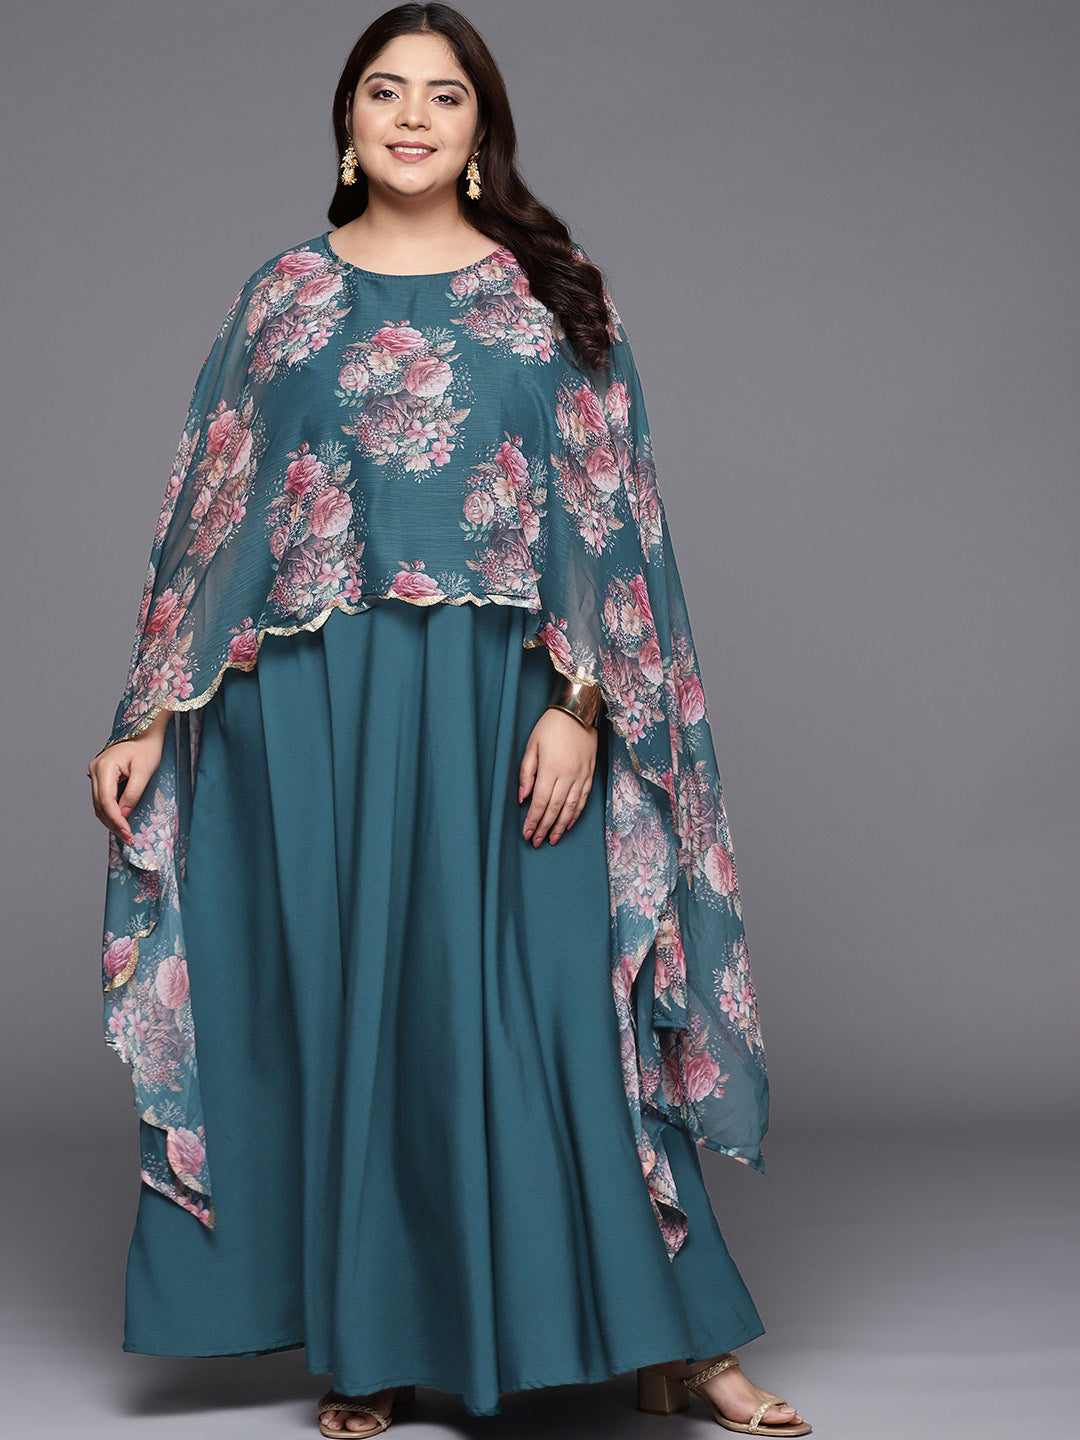 Green Printed Plus Size Maxi Ethnic Dress with Cape